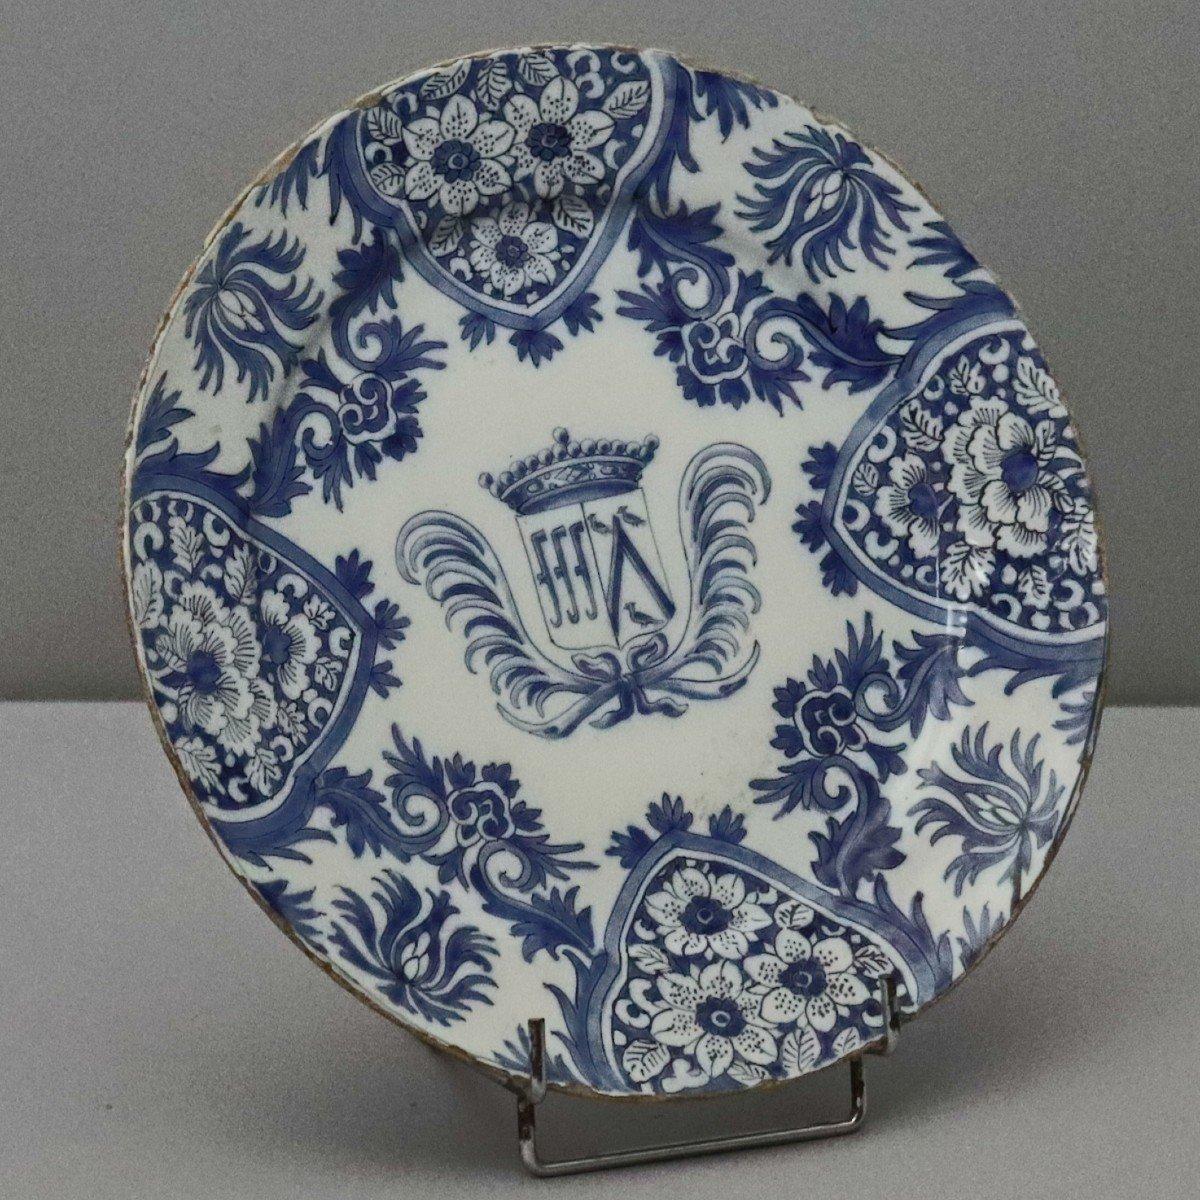 Rare 17th Century Earthenware Dish - Art by Unknown